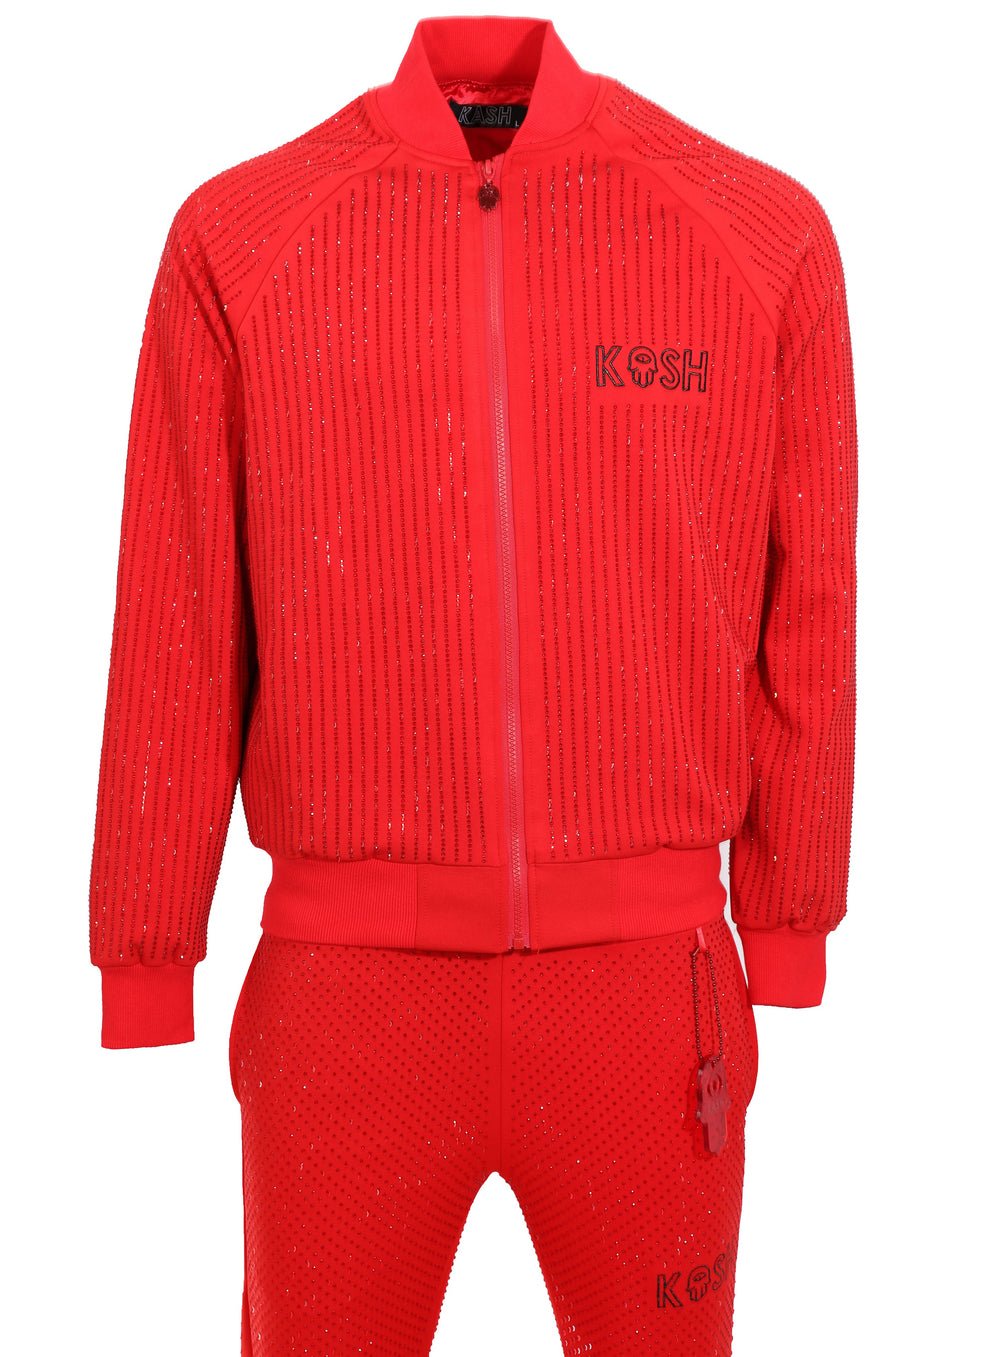 Kash All over diamond track jacket Color: Red 100% Polyester Wrinkle Free Material Fits true to size